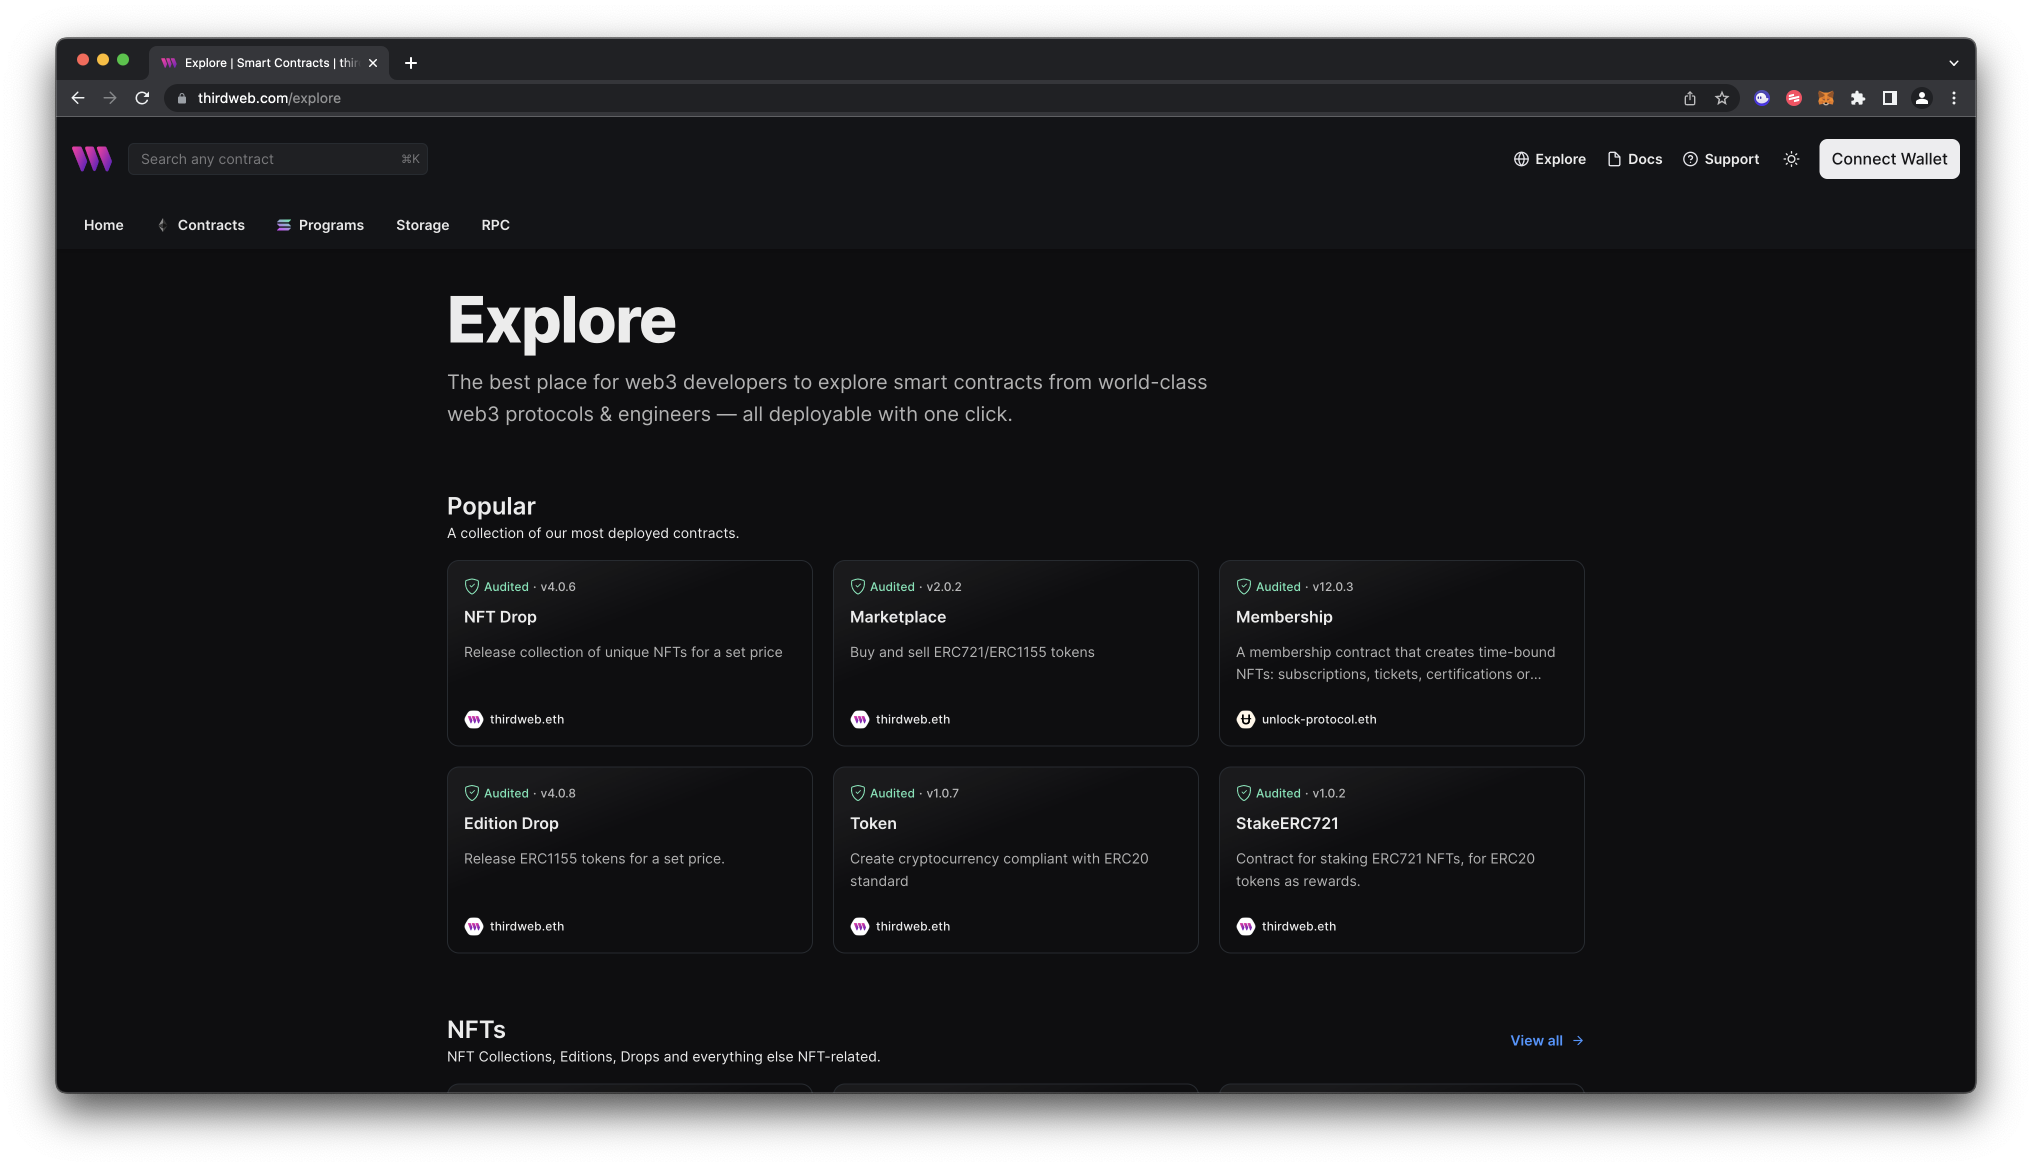 thirdweb Explore page featuring pre-built contracts